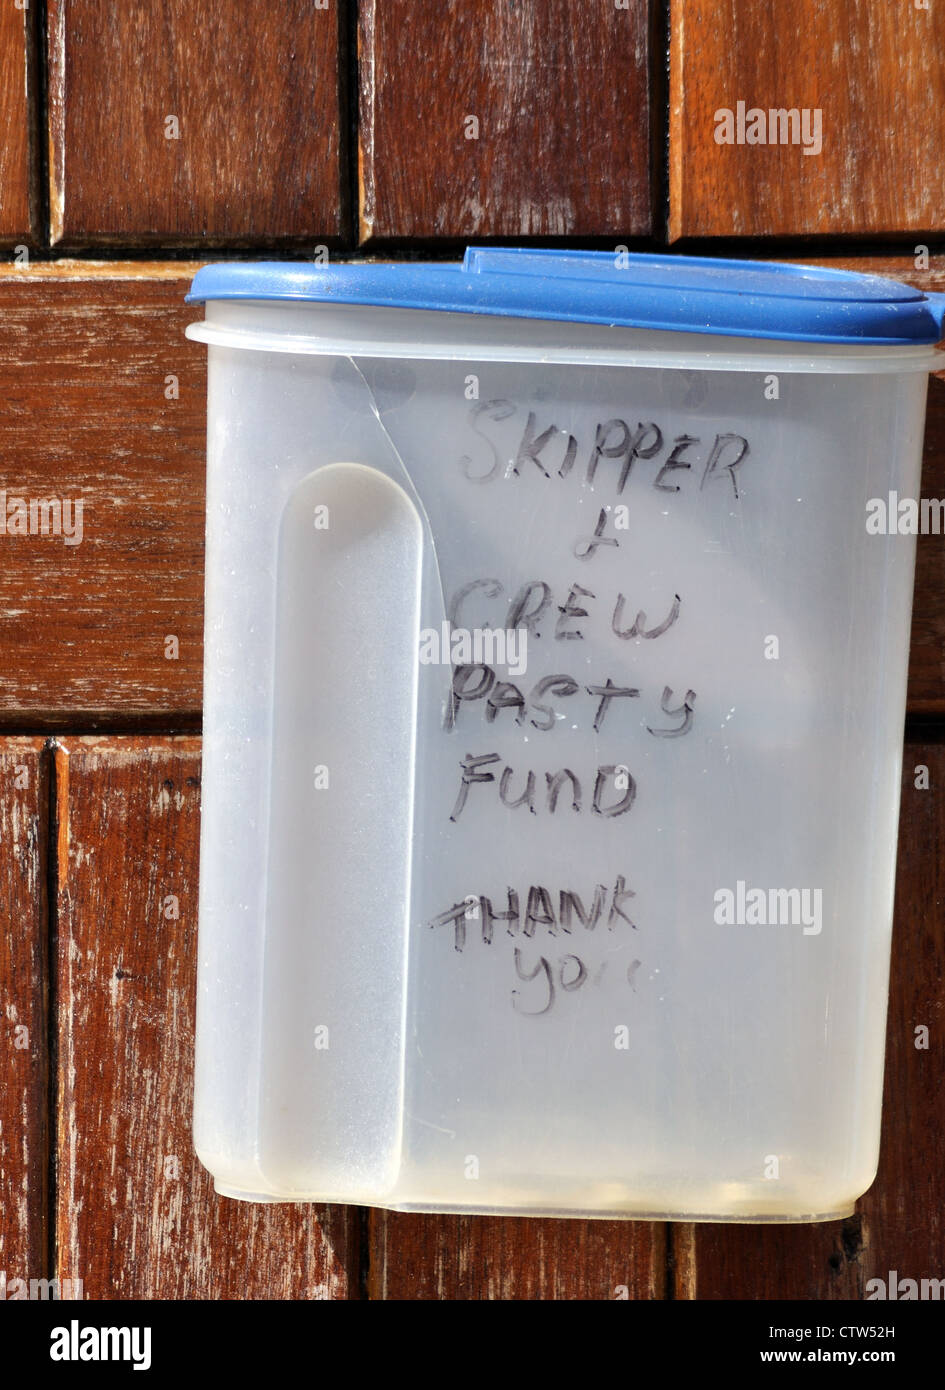 Novel method for collecting tips on board the St Mawes to Falmouth ferry.  Reads "skipper and crew pasty fund, thank you" Stock Photo